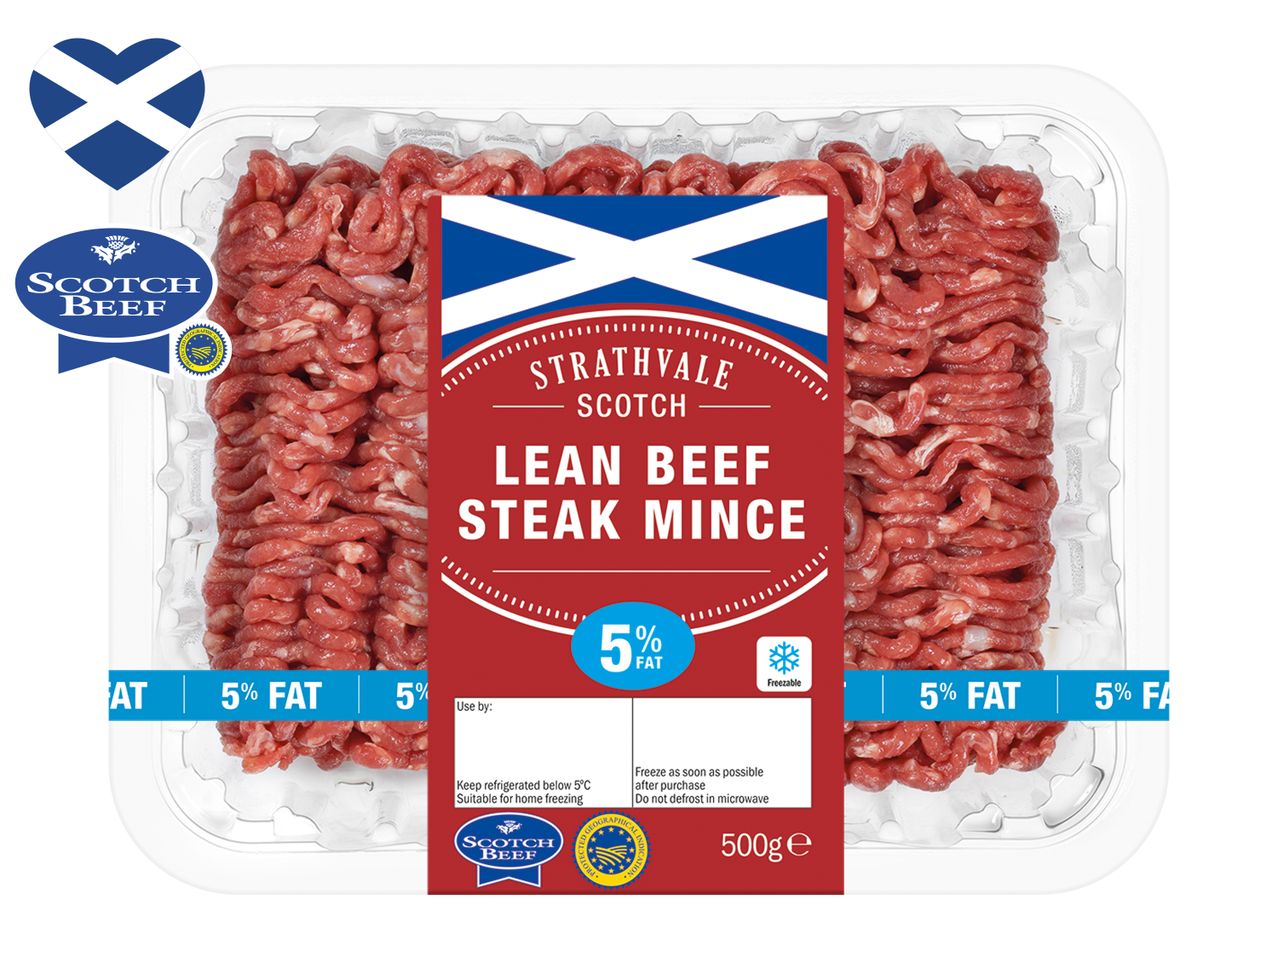 Go to full screen view: Strathvale Scotch Beef Lean Steak Mince - Image 1